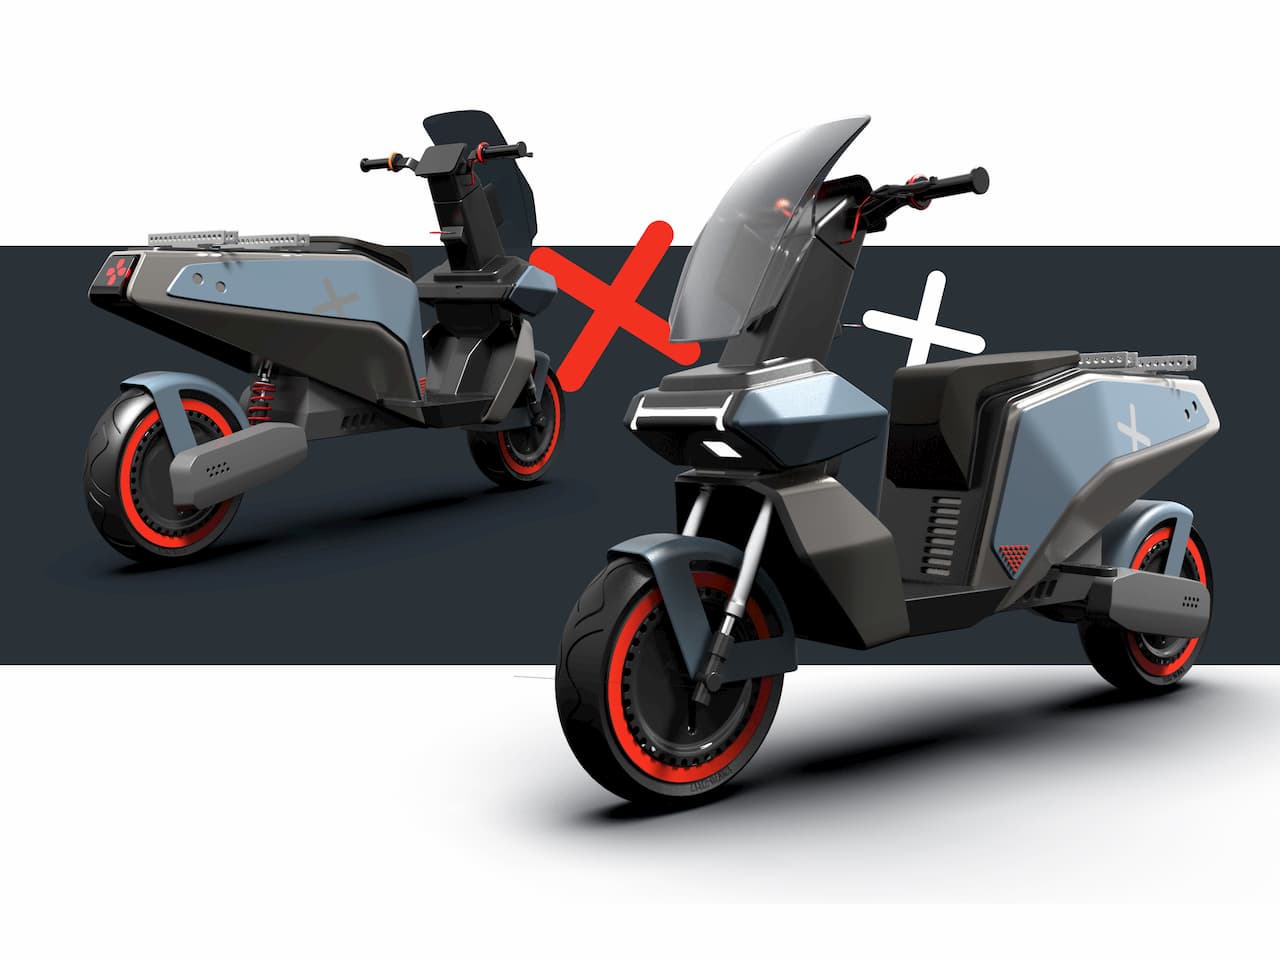 XScoot electric scooter front by Rugved Patil